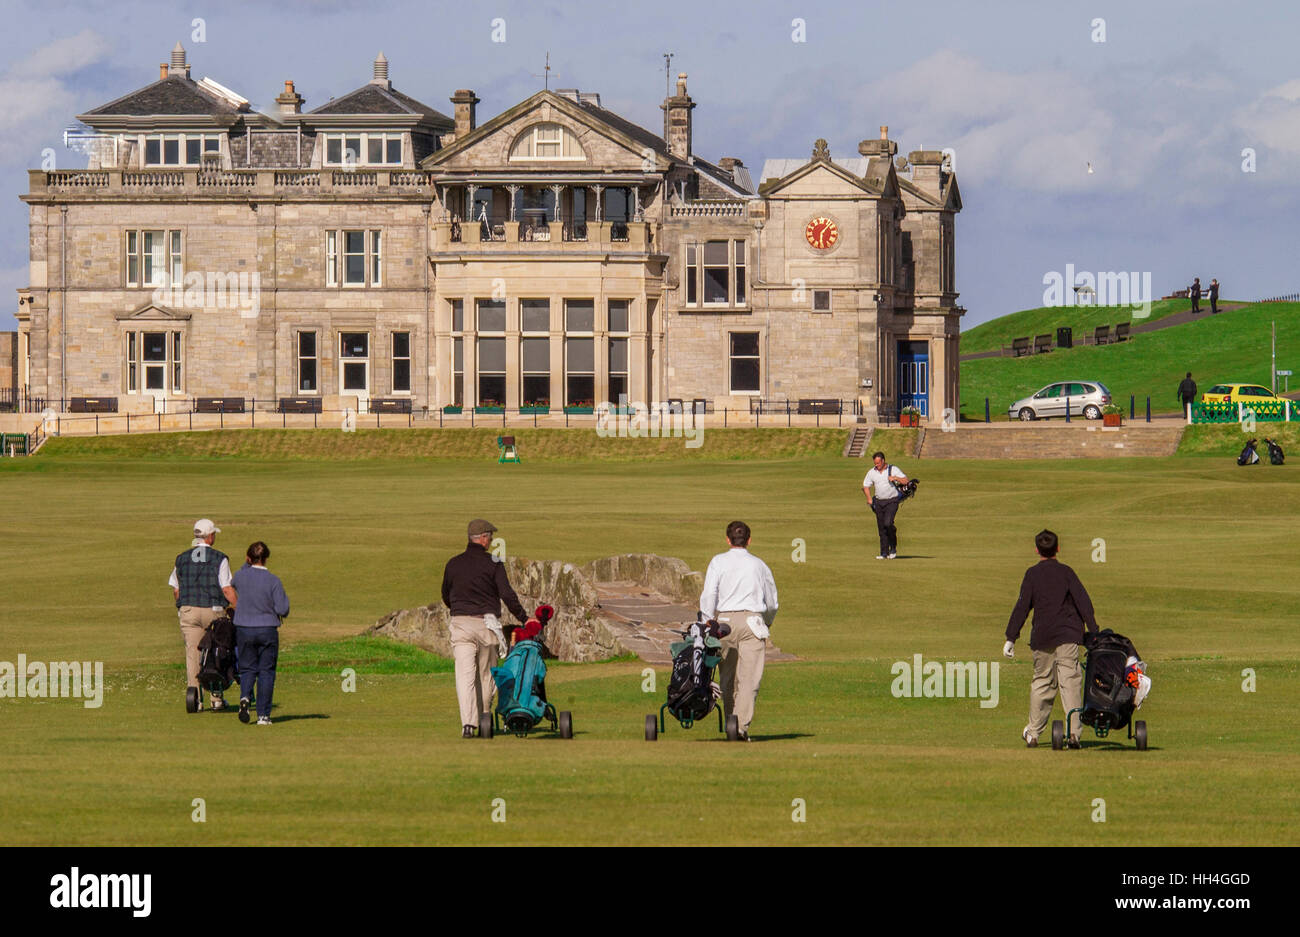 The 18th fairway and the Royal and Ancient clubhouse at St. Andrews golf course. Fife Scotland. 2003 The Swilken Bridge. Stock Photo